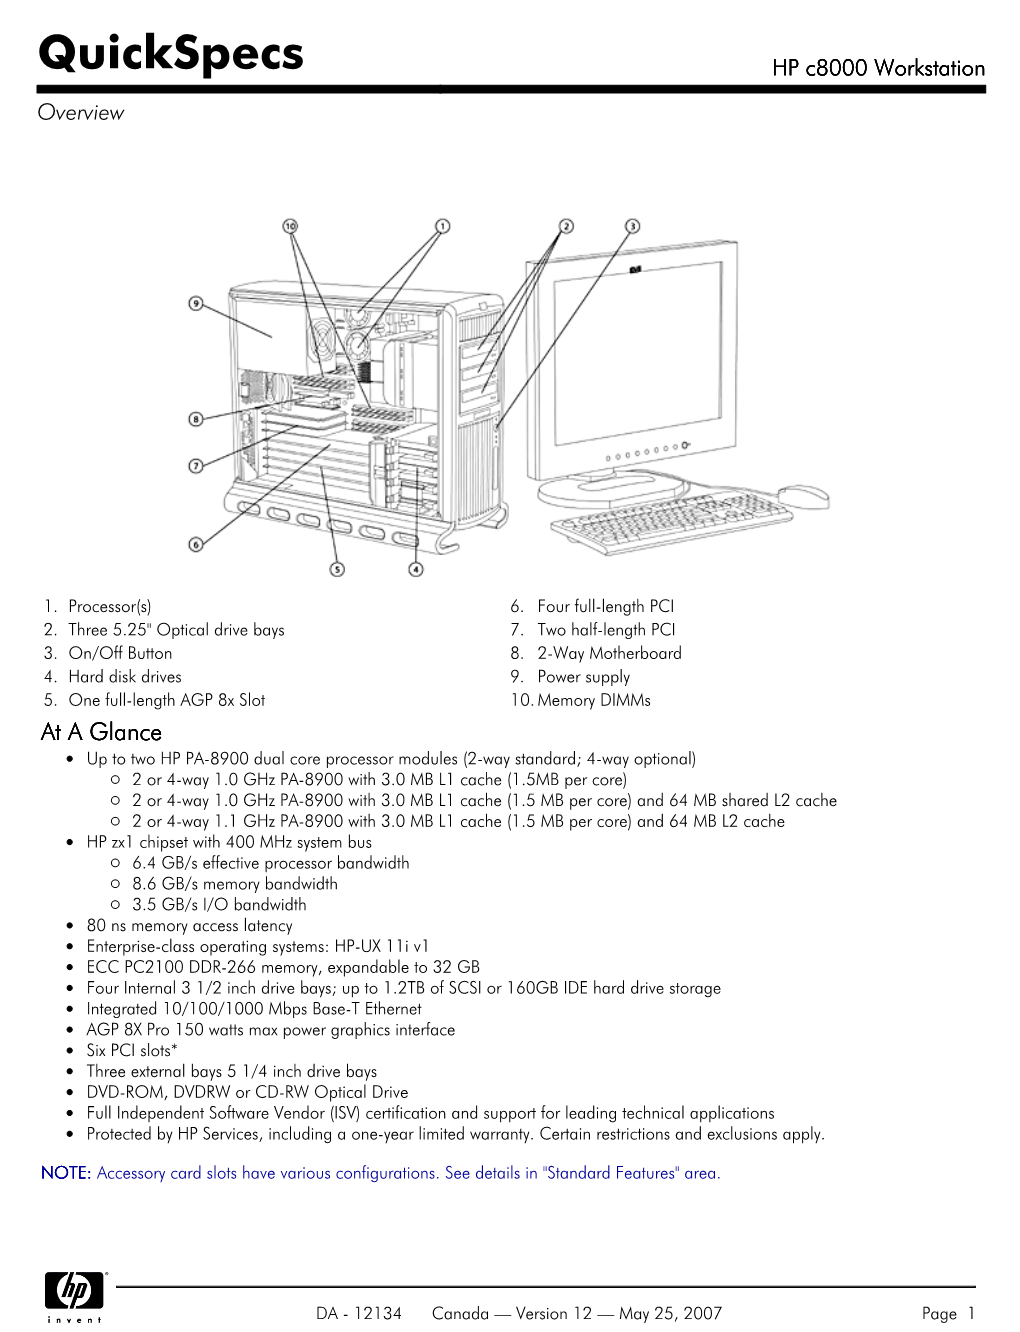 HP C8000 Workstation Overview